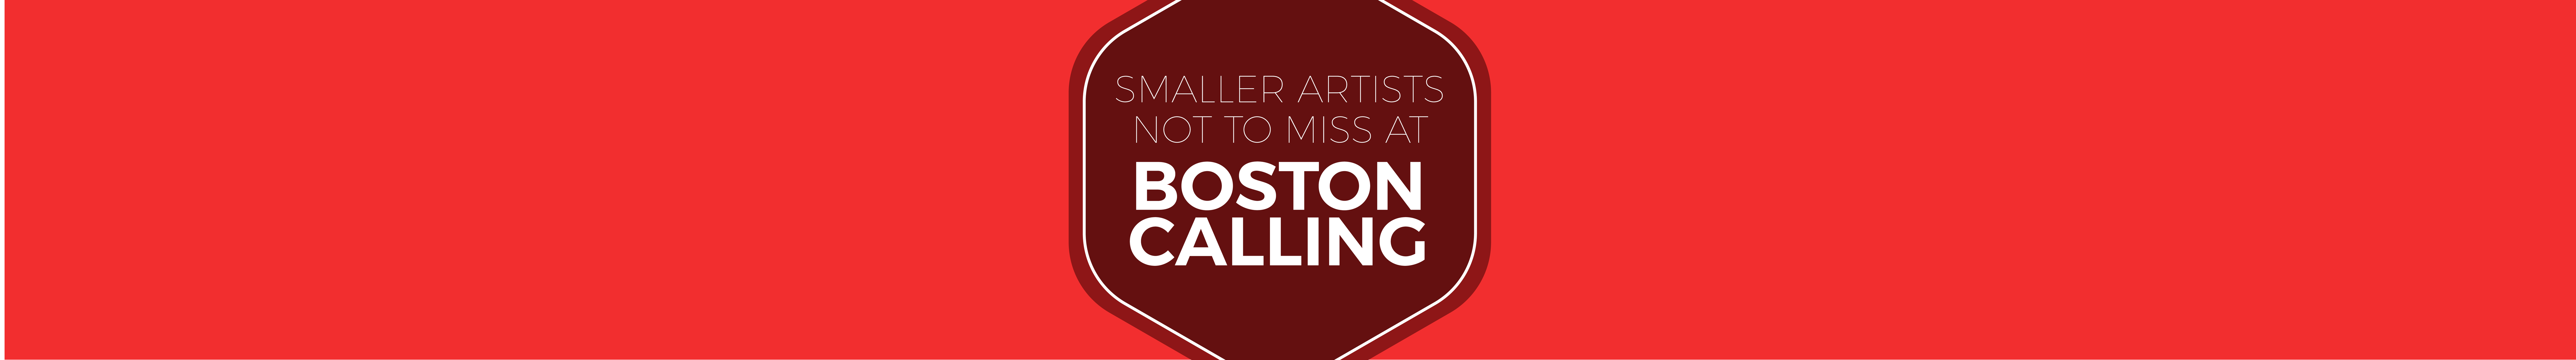 Boston Calling Smaller Artists Graphic by Bobby Nicholas